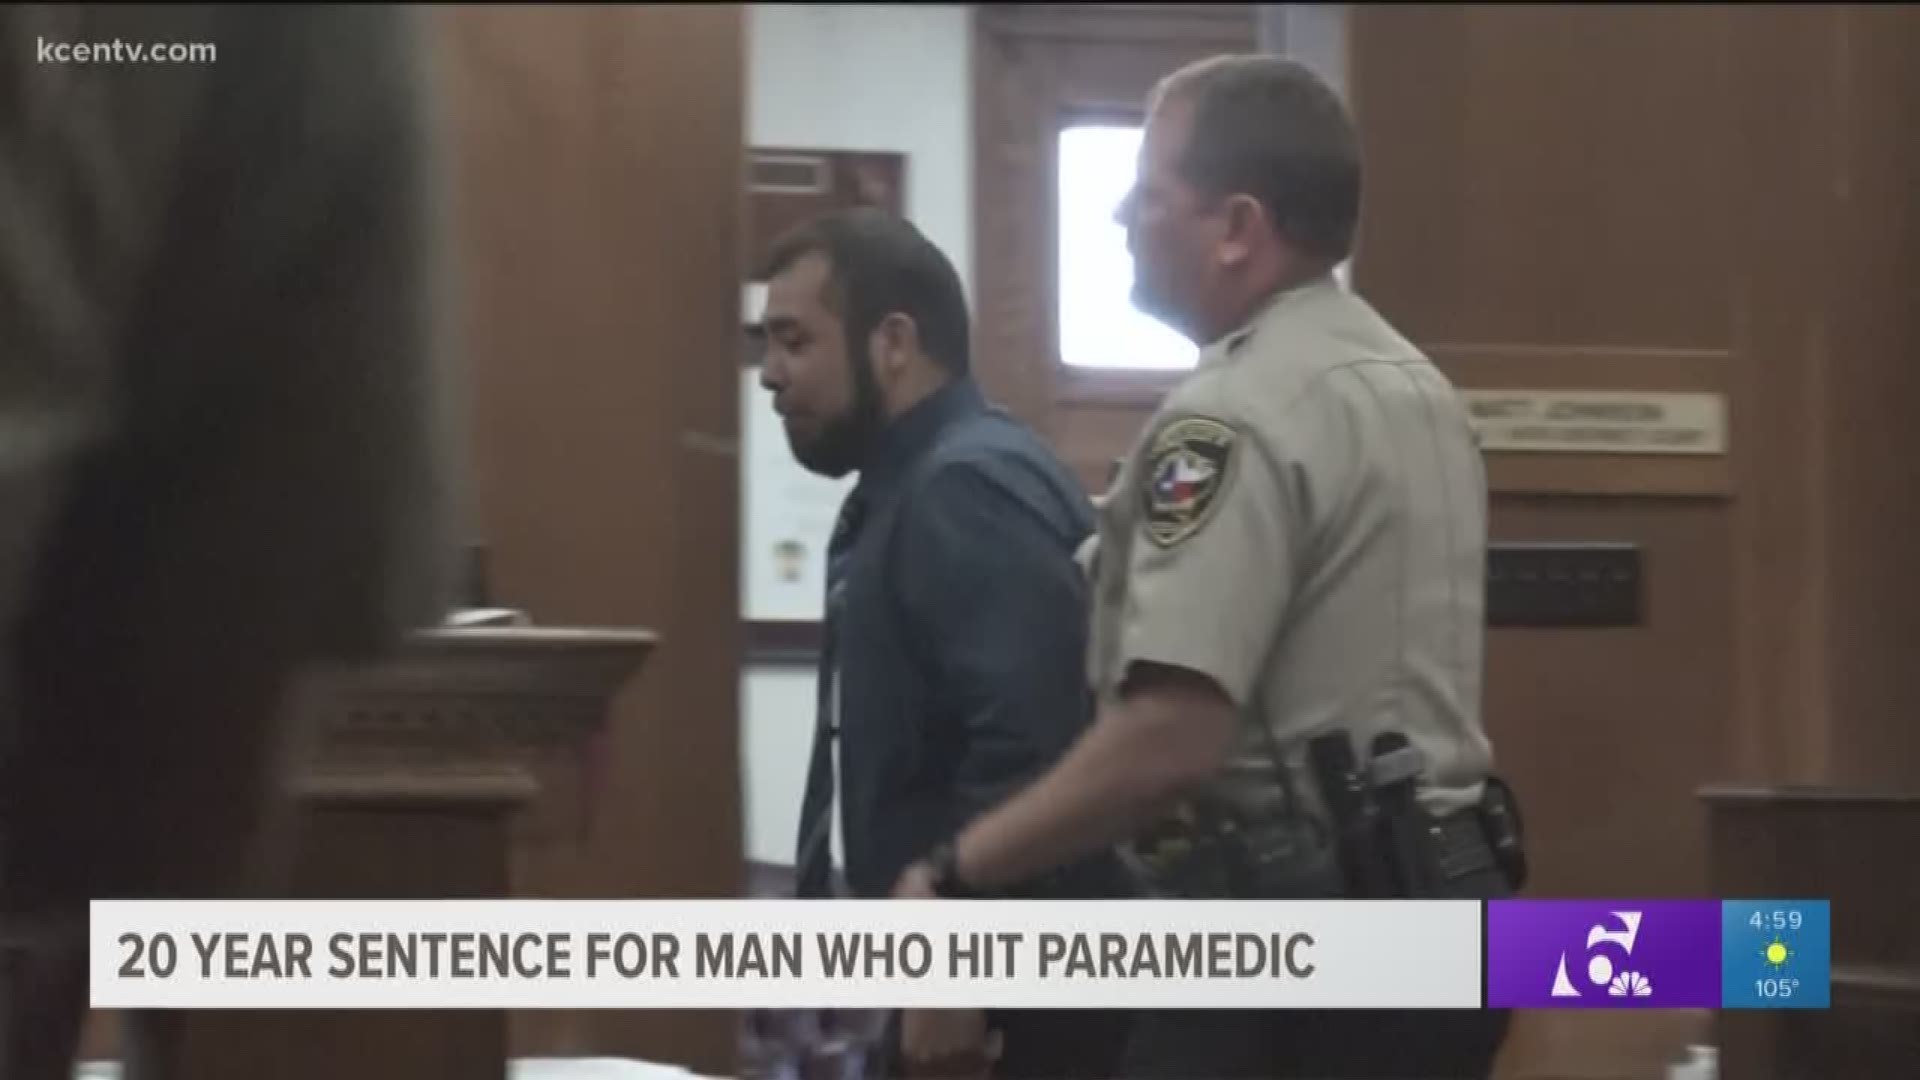 The man who ran over a McLennan County paramedic while driving drunk has a 20-year prison sentence ahead of him. 